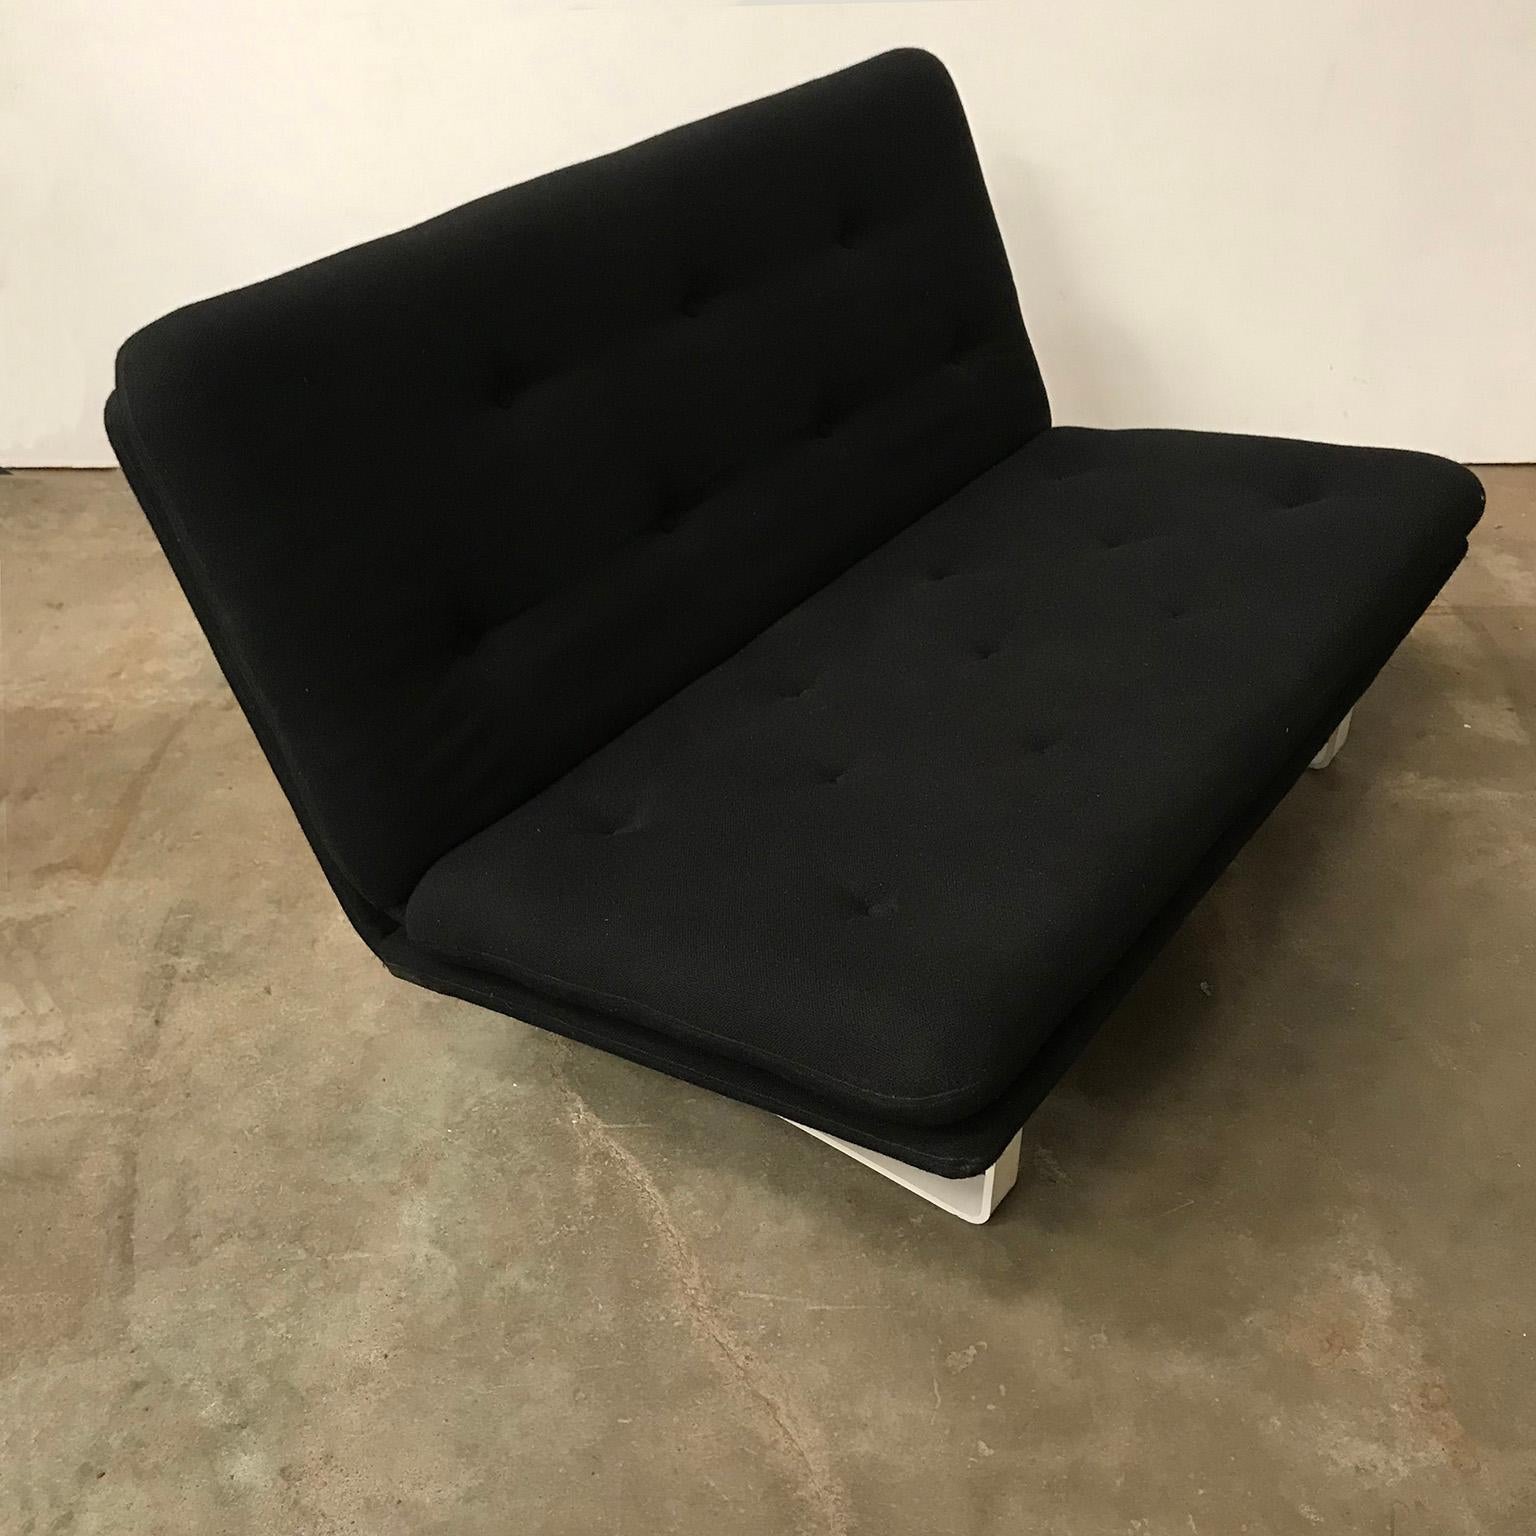 Original, early, stronger manufactured as nowadays, Kho Liang Ie sofa two-seat, not in production anymore, in black fabric and padded. The upholstery shows some traces of wear like some fading of the colour and some pilling. The legs are white and